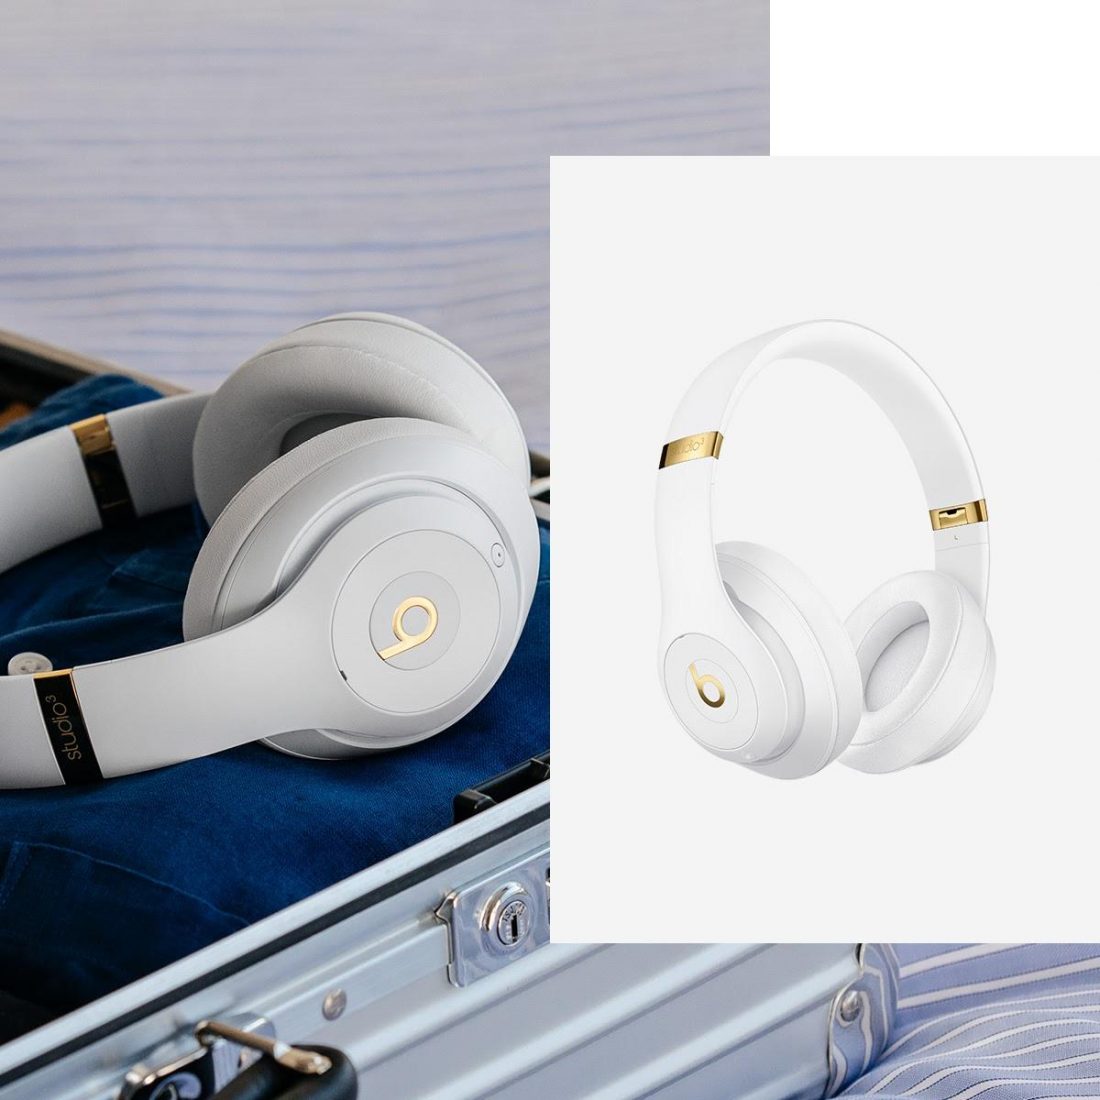 A pair of Beats by Dre headphones. (From: beatsbydre.com)